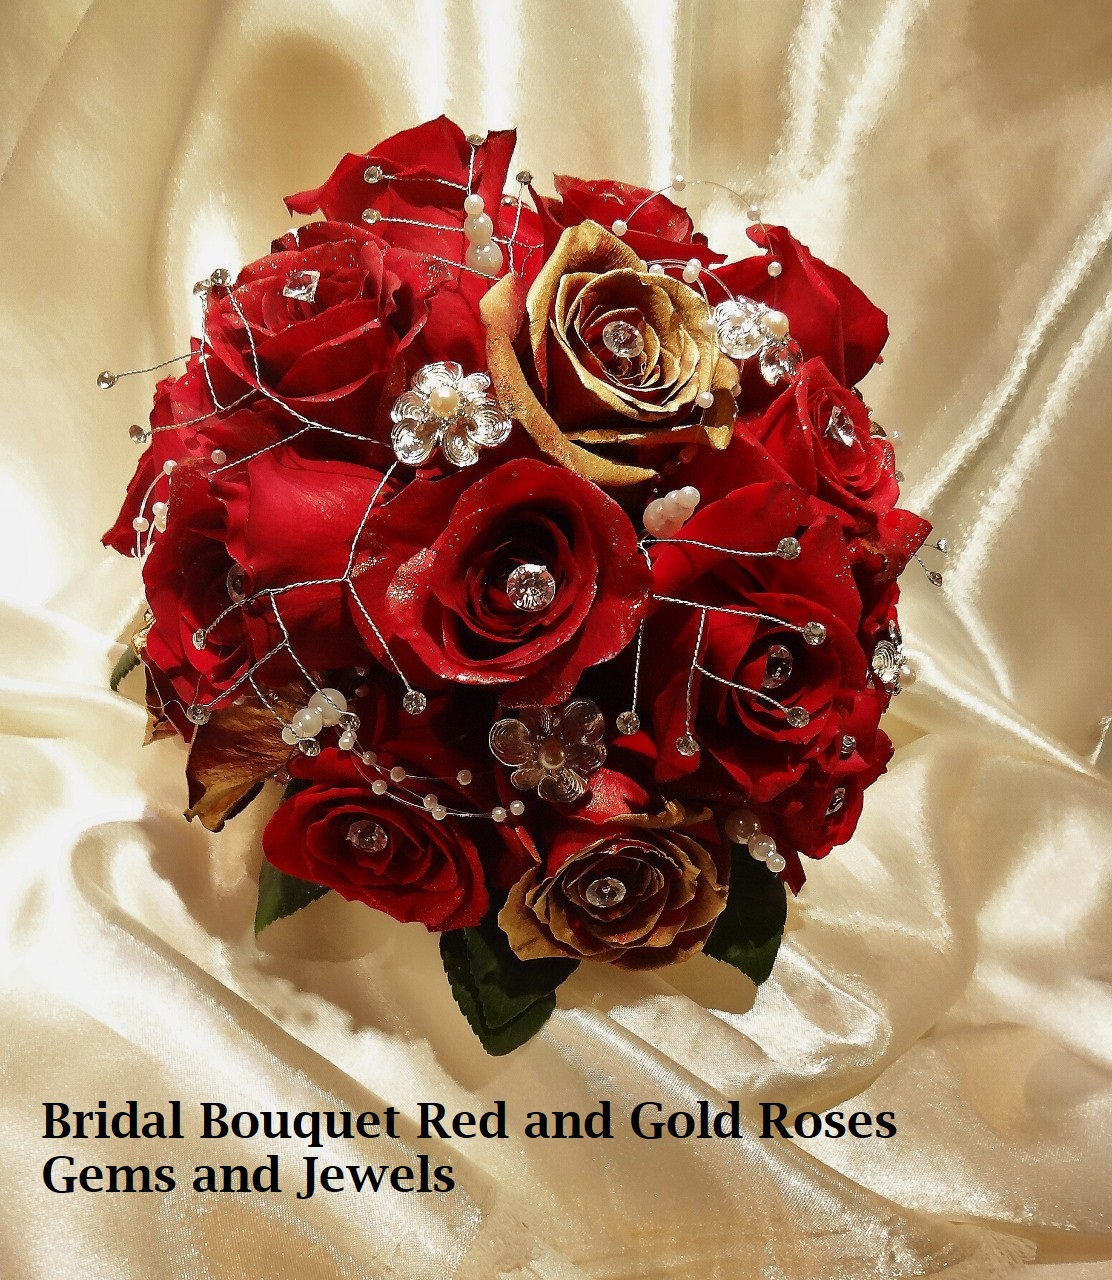 Bridal Bouquet Red and Gold Roses 
Gems and Jewels 